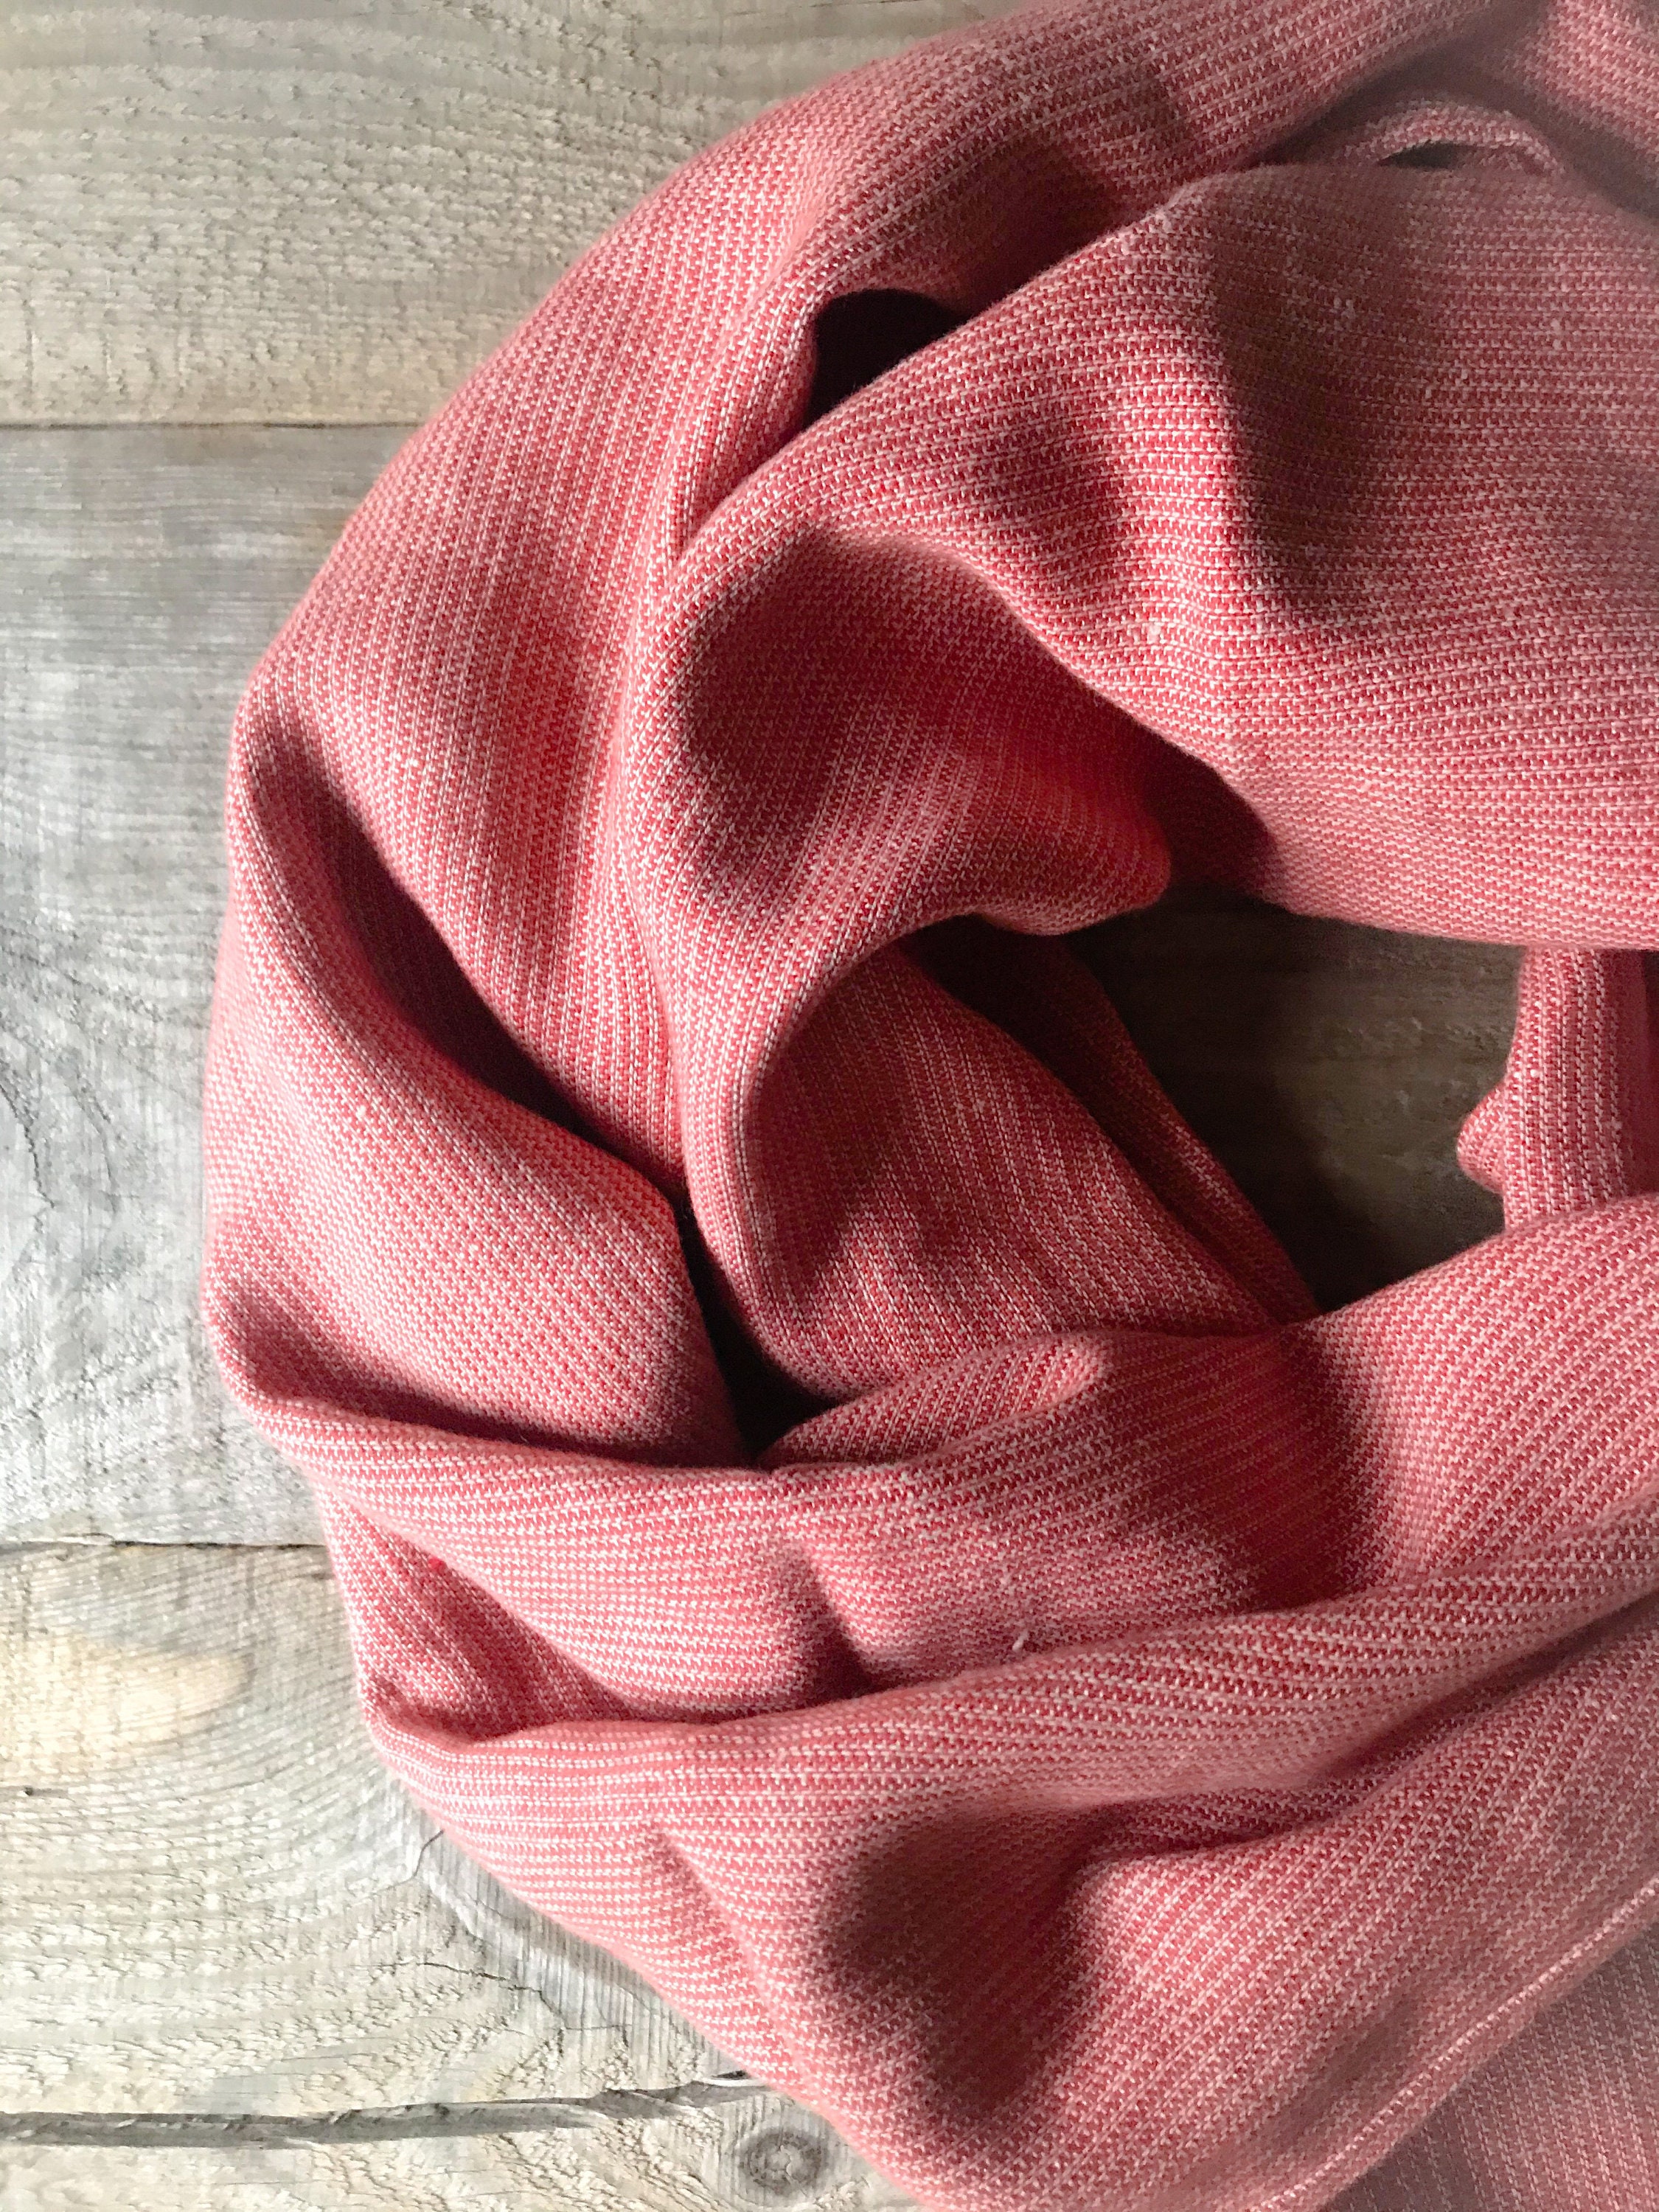 Thick Linen Blend Scarf in Rustic Red Stripes/ Heavyweight Unisex Scarf/Linen All Season Scarf/Free Shipping